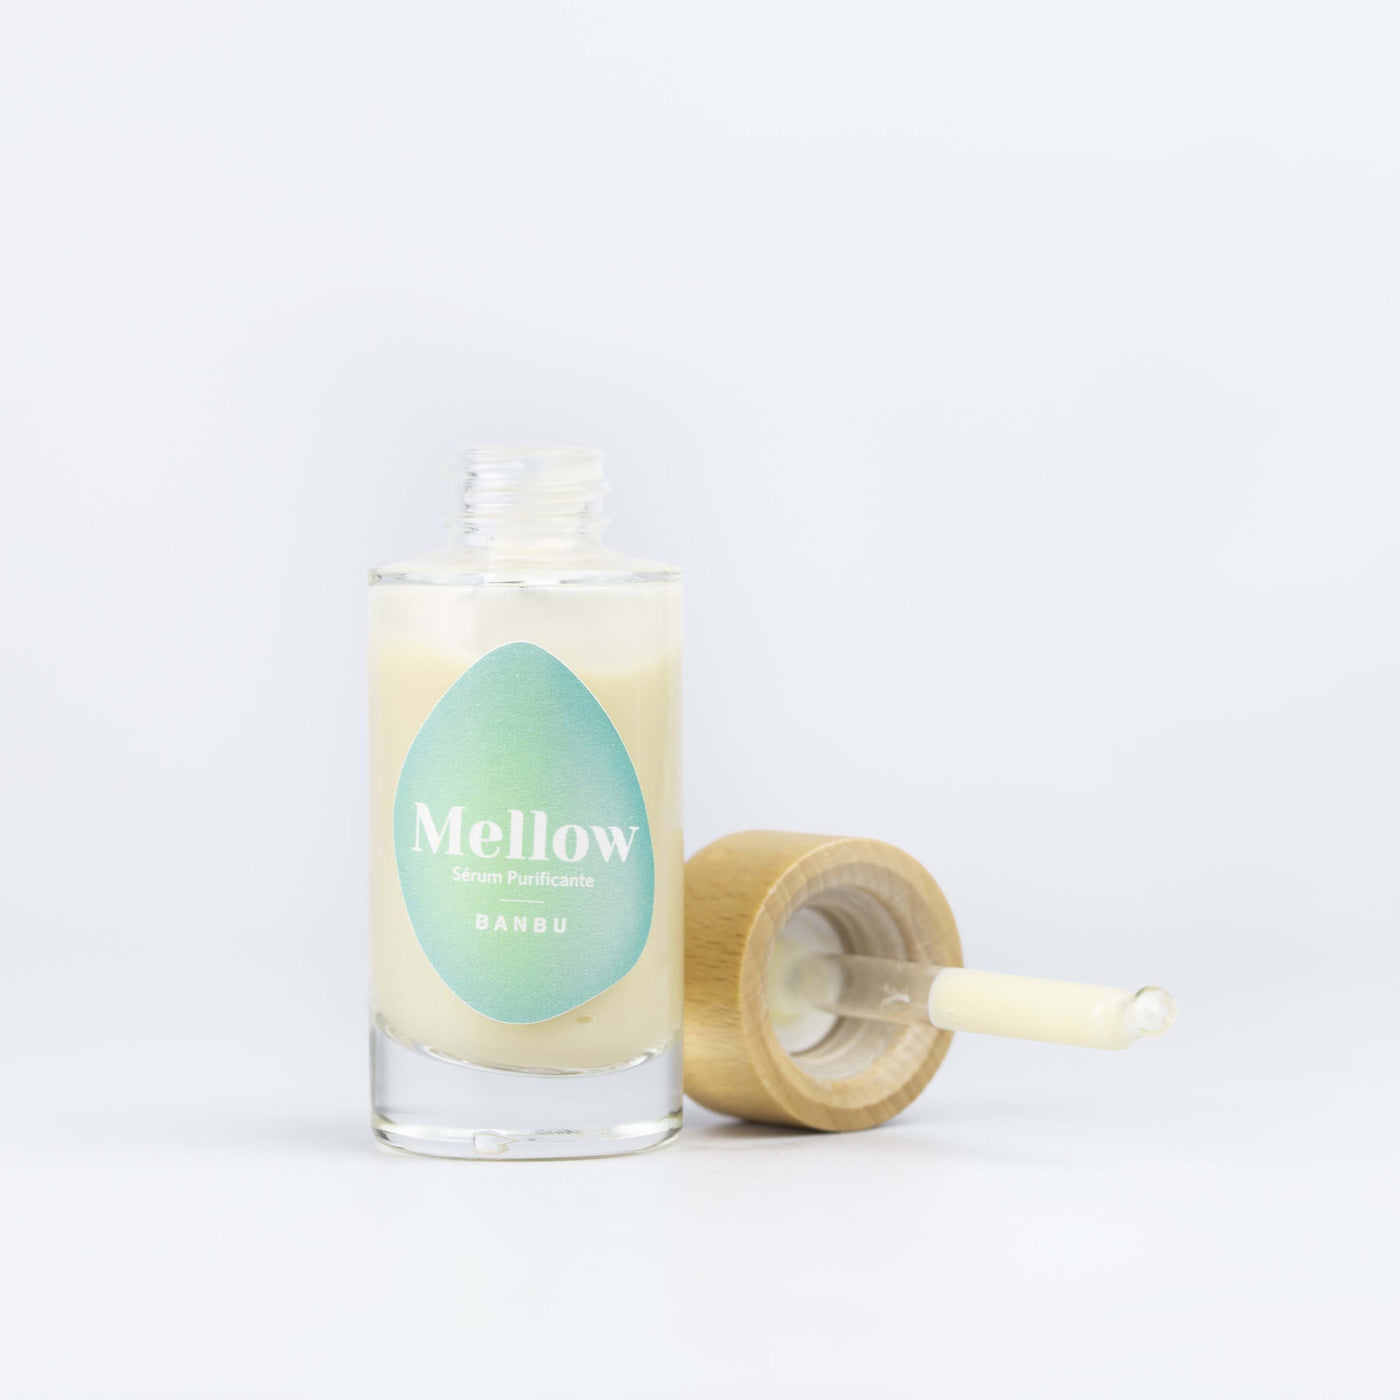 Mellow Purifying Serum - Roses & Chains | Fashionable Clothing, Shoes, Accessories, & More